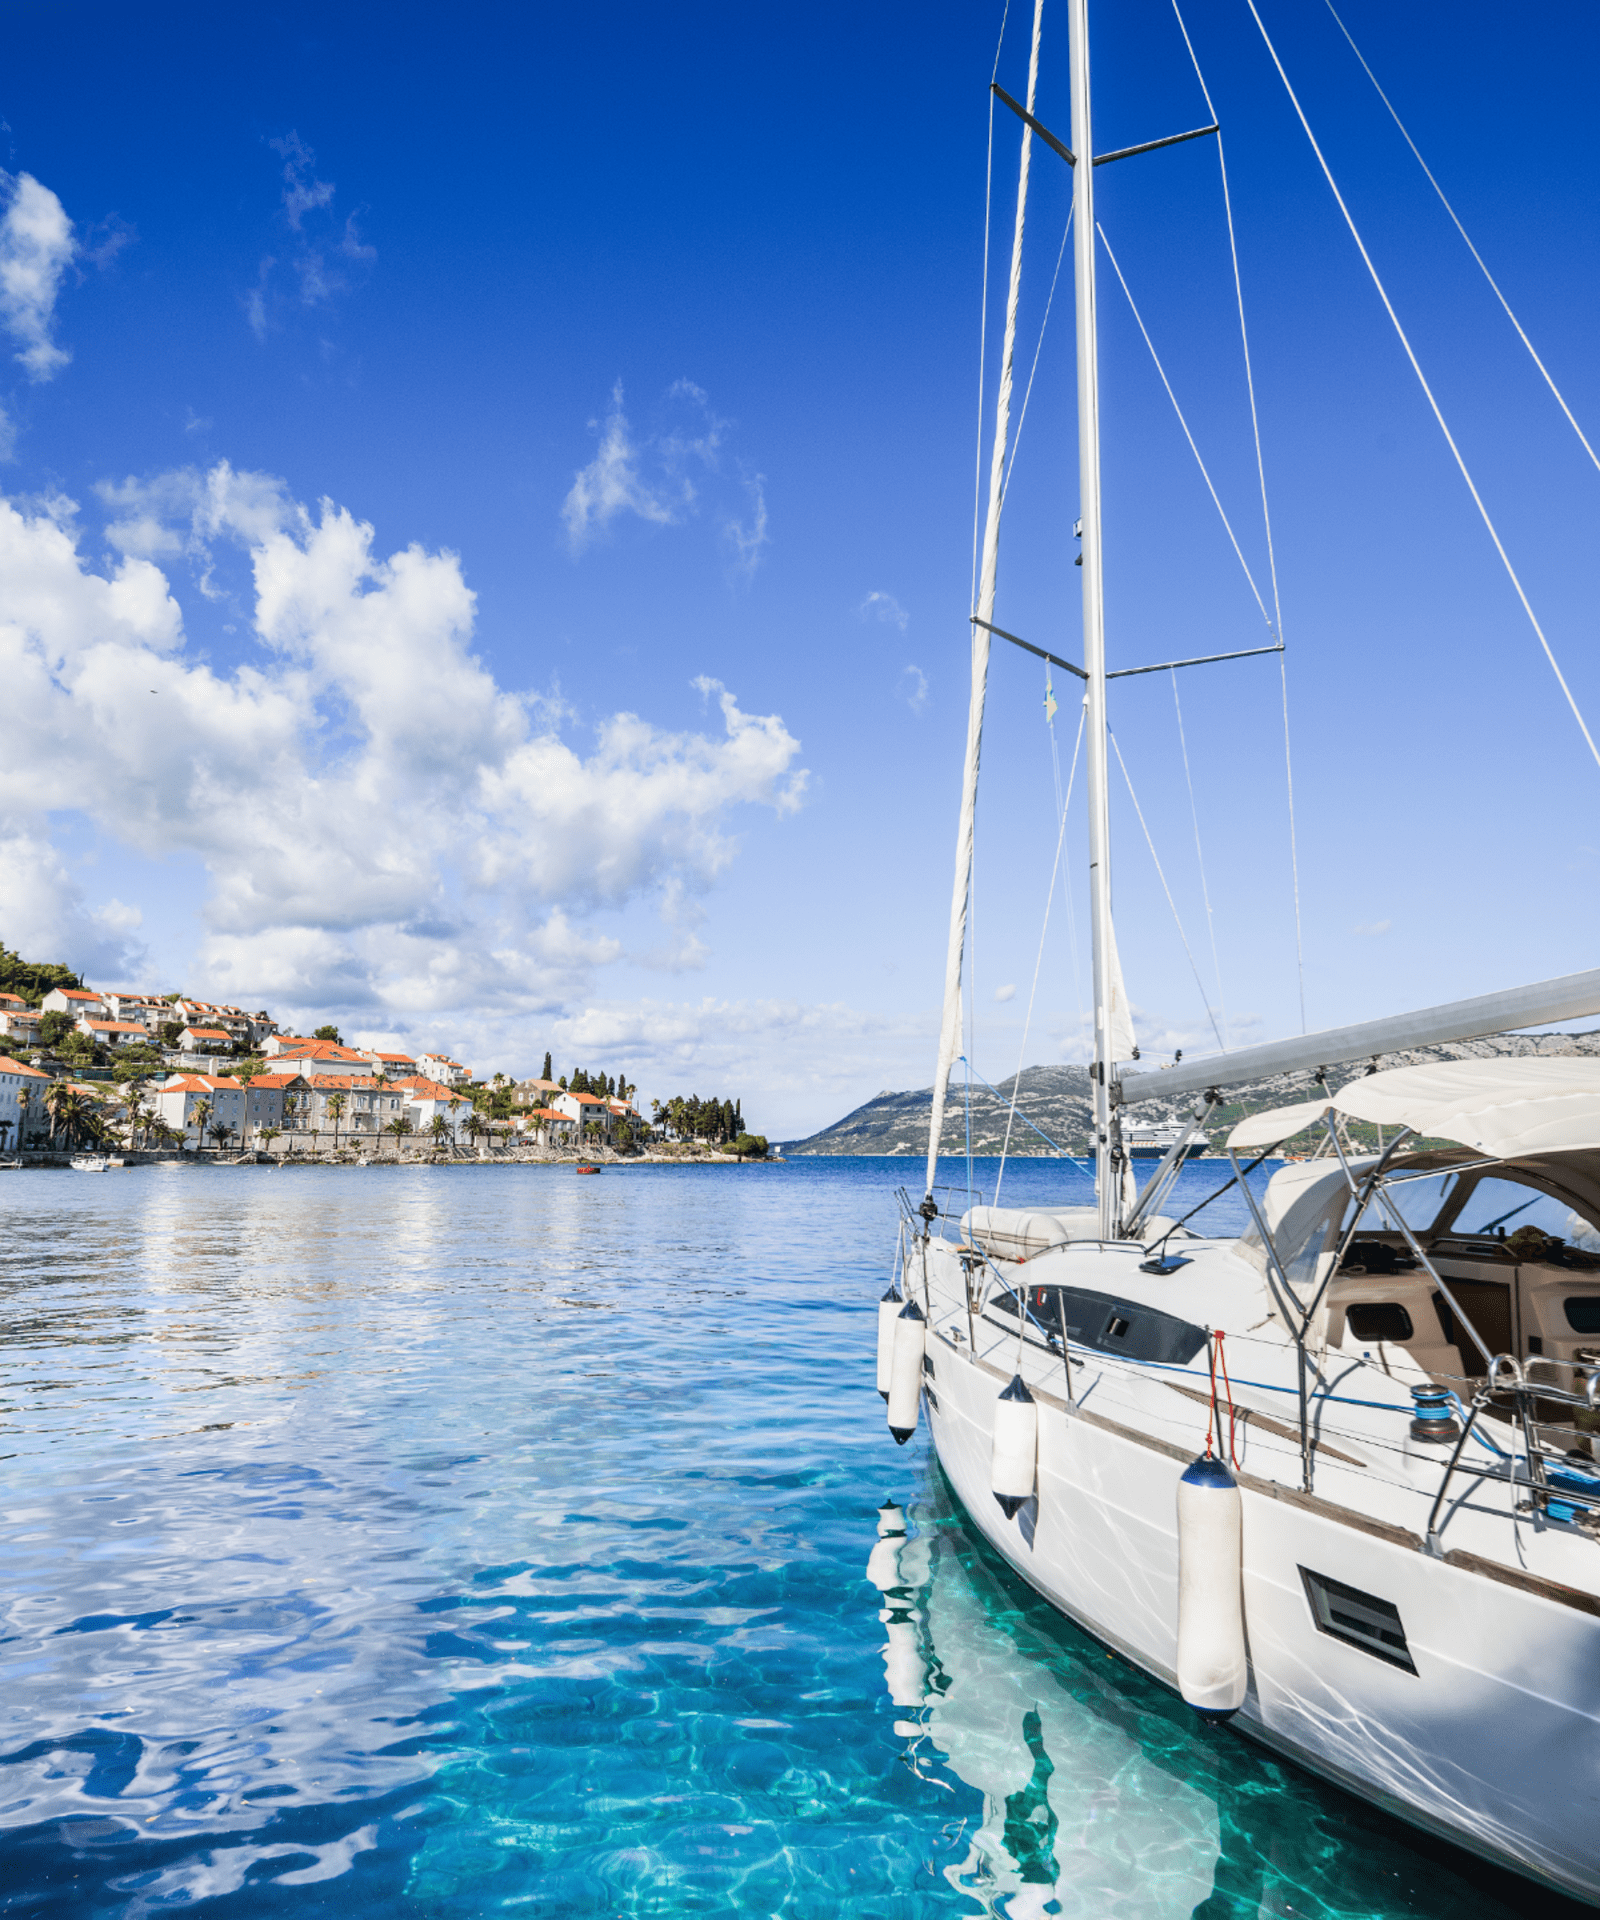 Sailing is the best way to explore Croatia's many picturesque islands